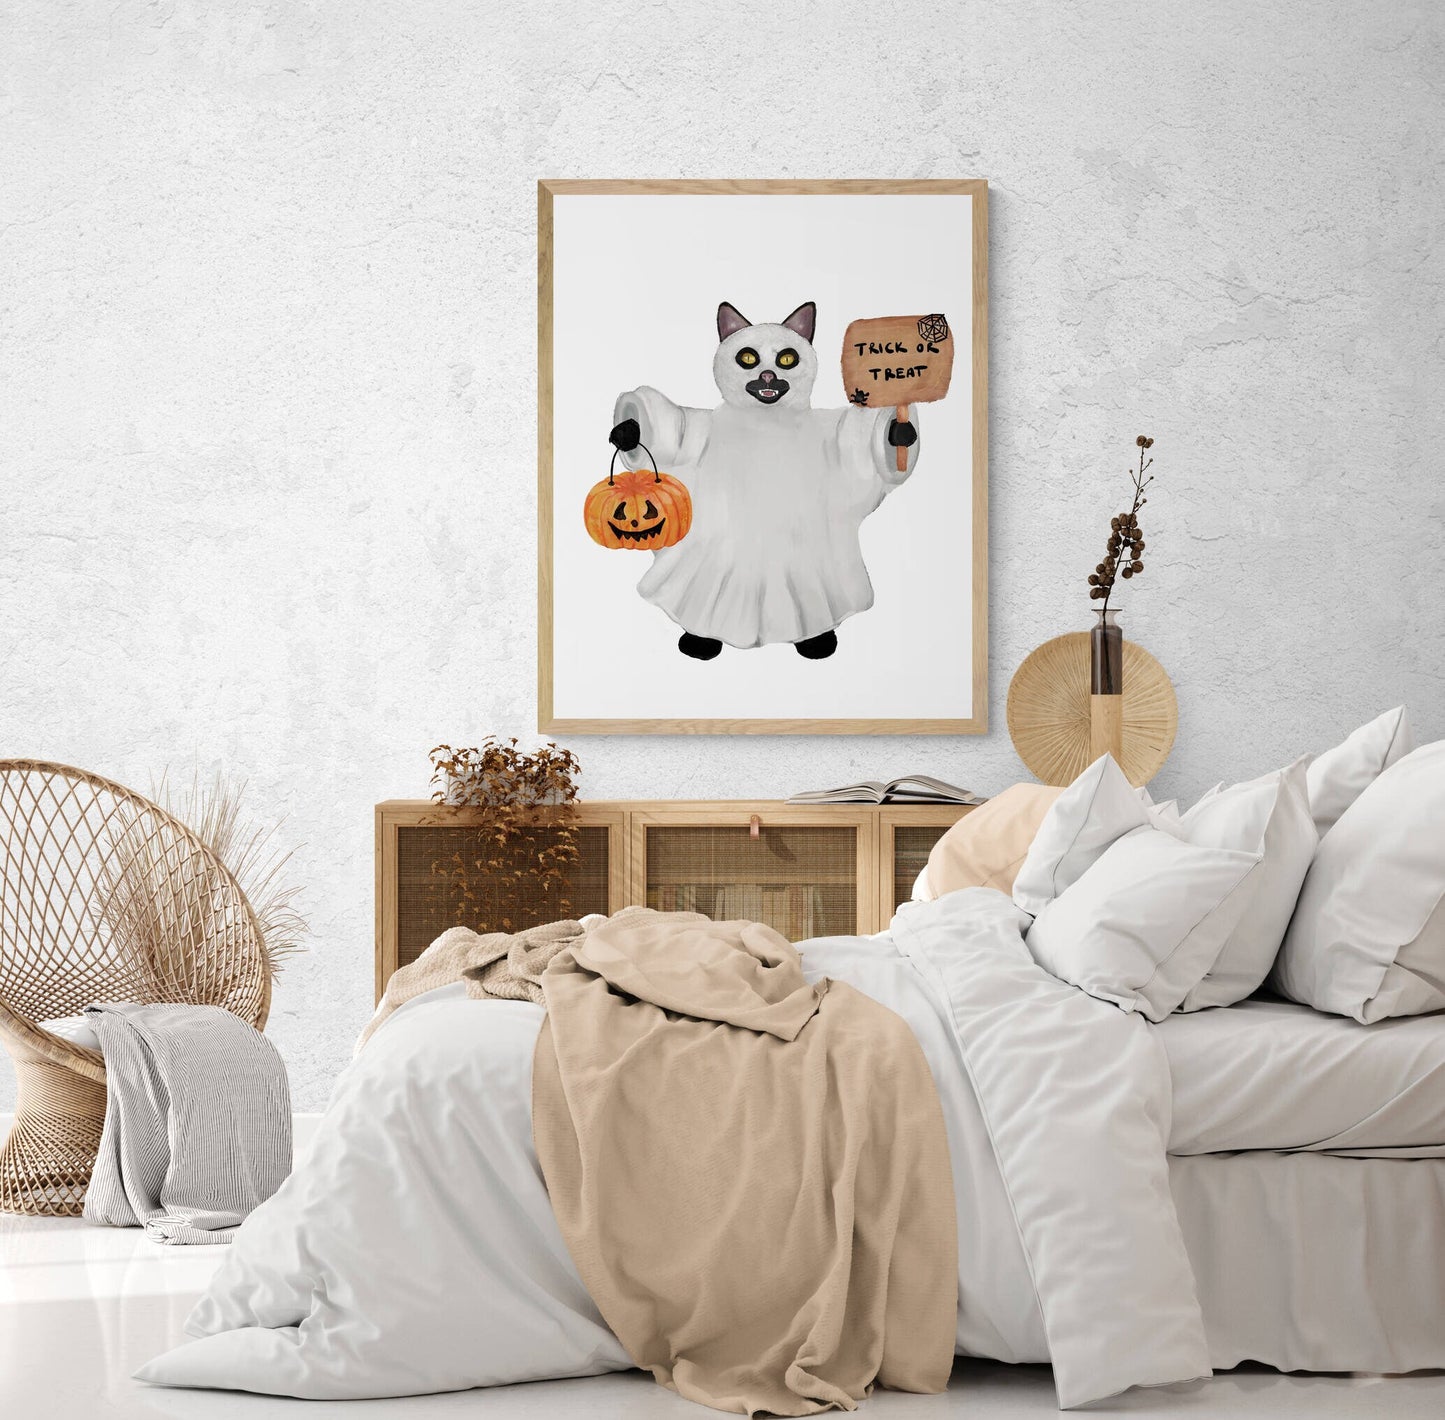 Black Cat with Ghost Costume Print, Halloween Cat Painting, Black Cat With Pumpkin Portrait, Holiday Wall Art, Fall Autumn Wall Print